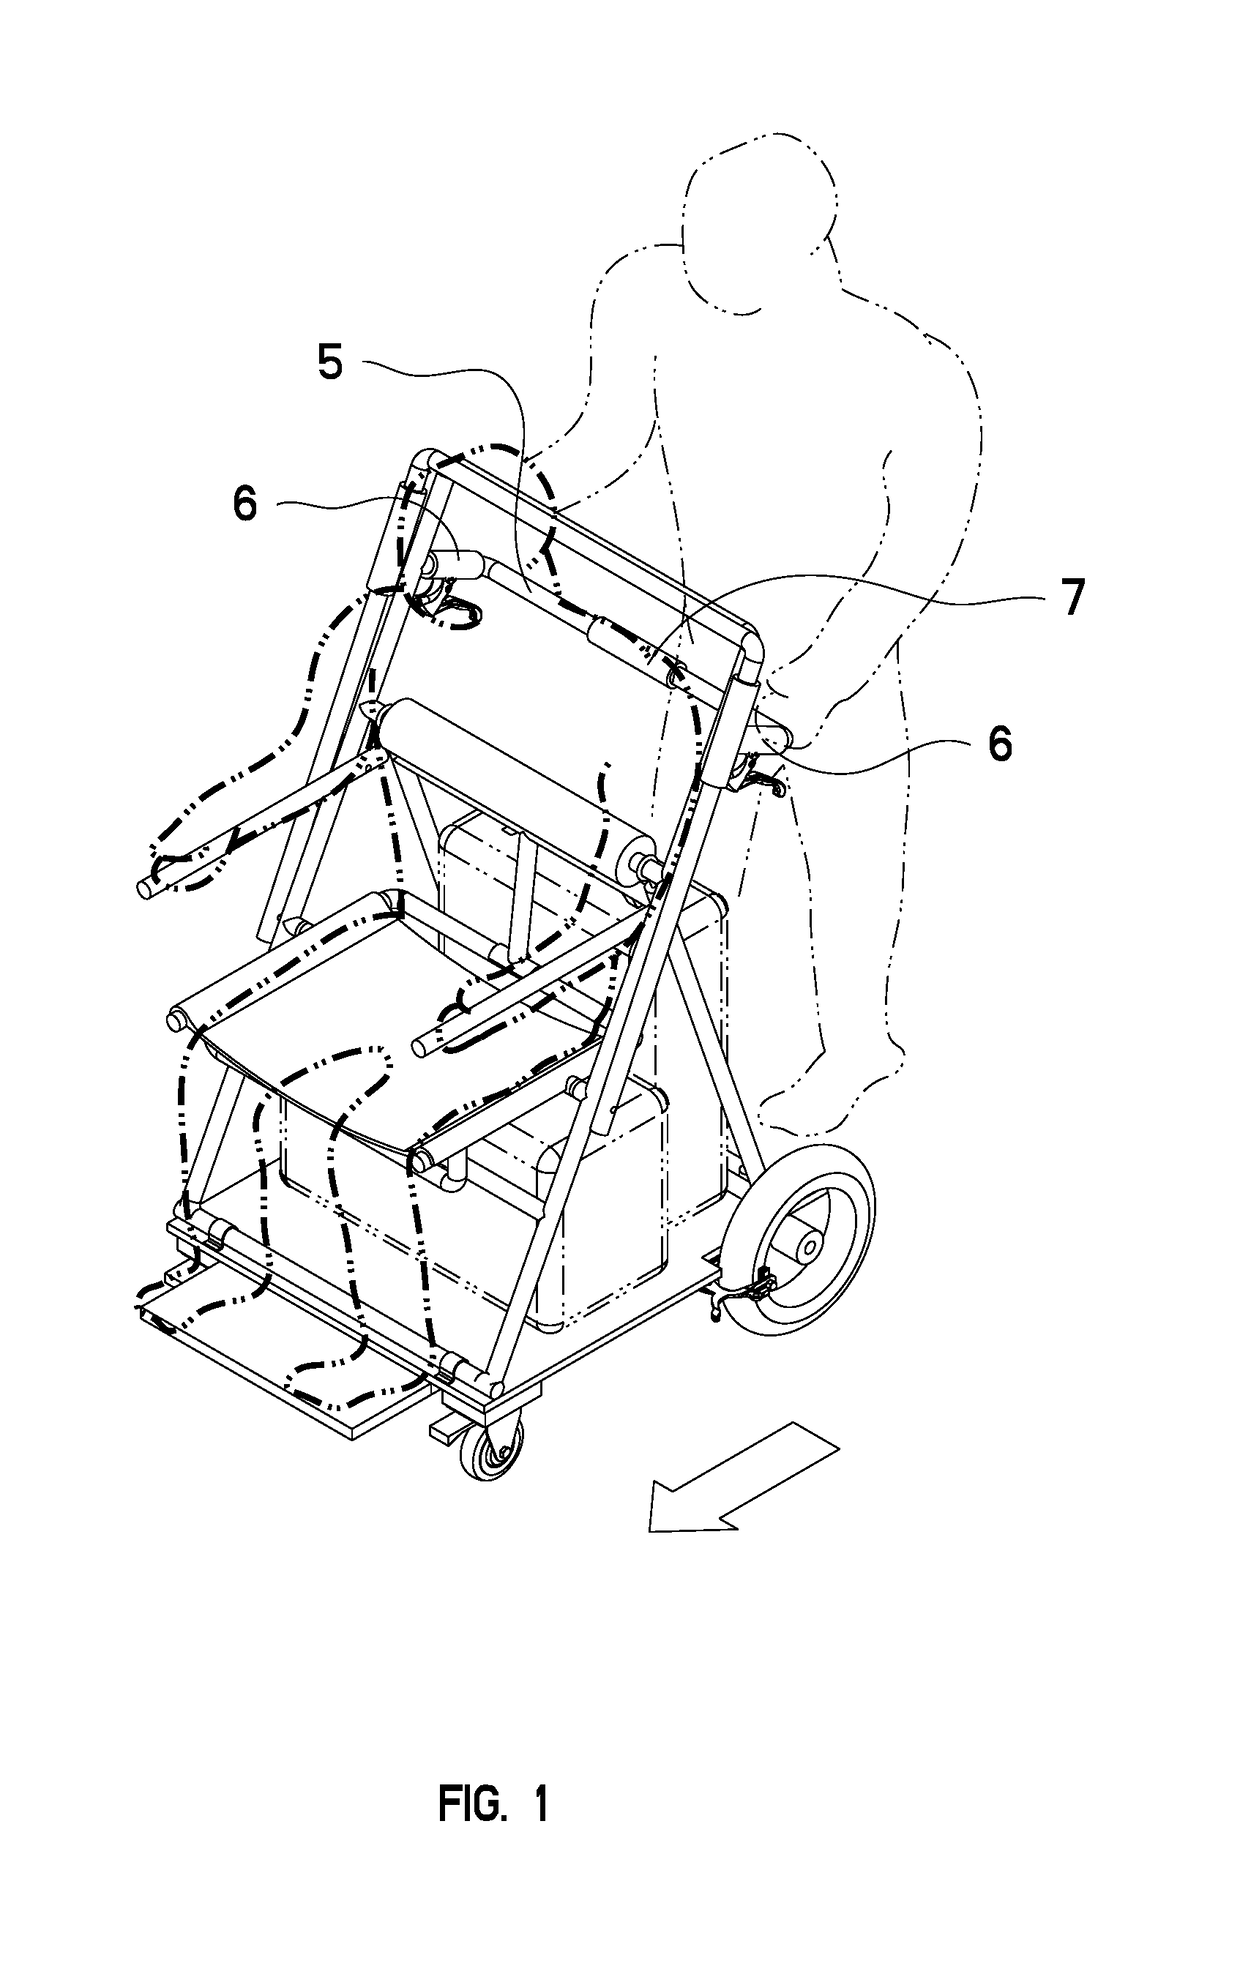 Collapsible transport chair with baggage capability